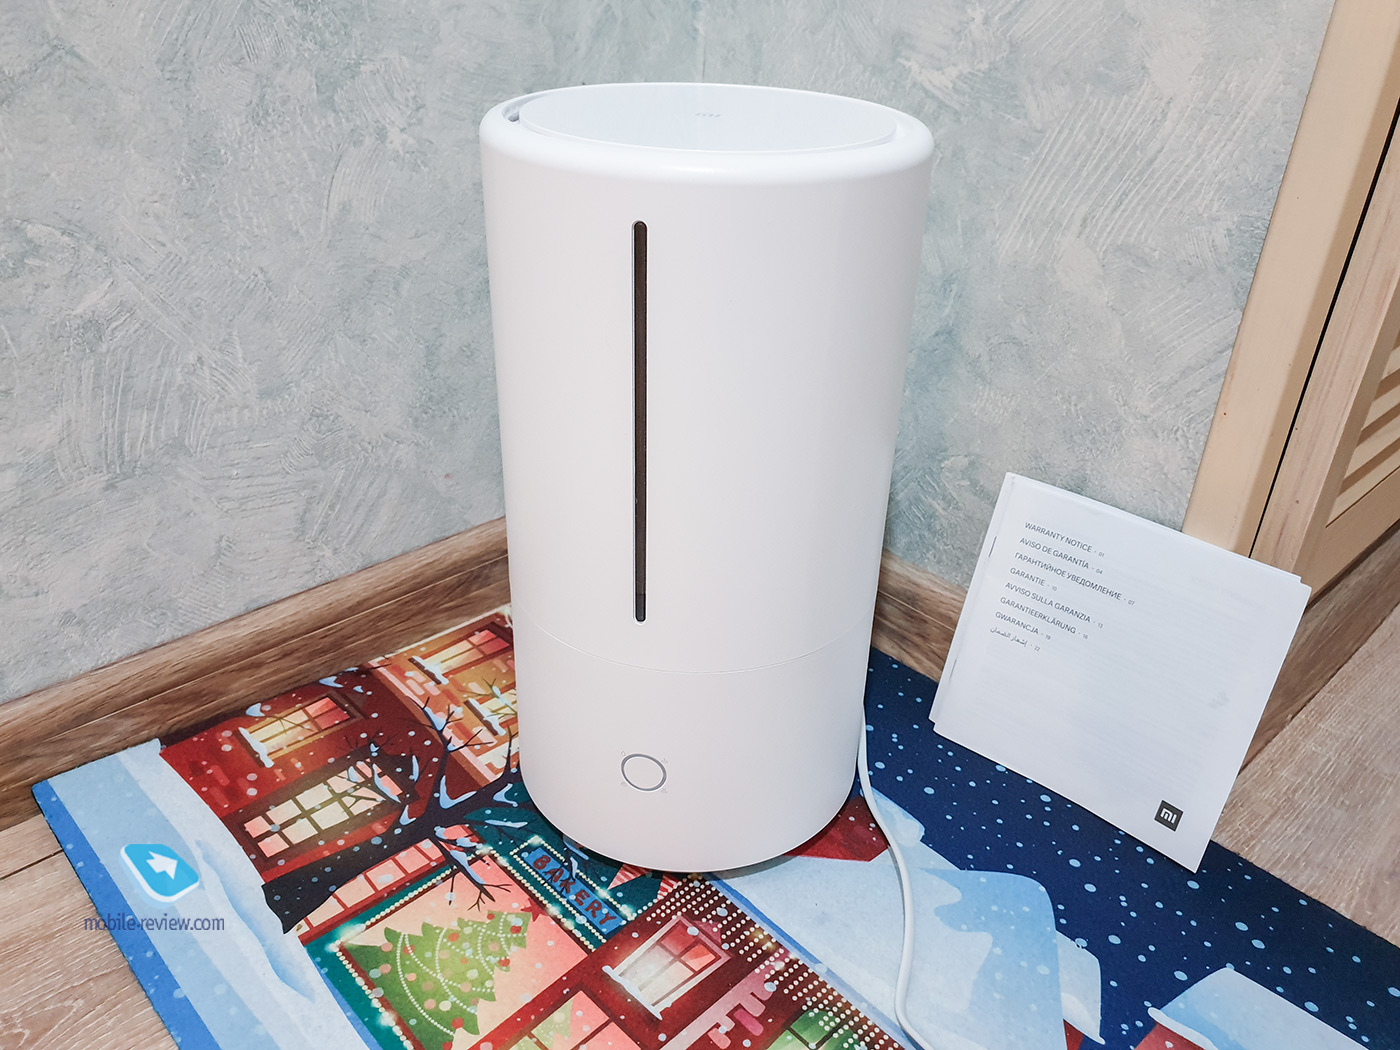 Review of Xiaomi Mi Smart Antibacterial Humidifier (for the wettest dreams)